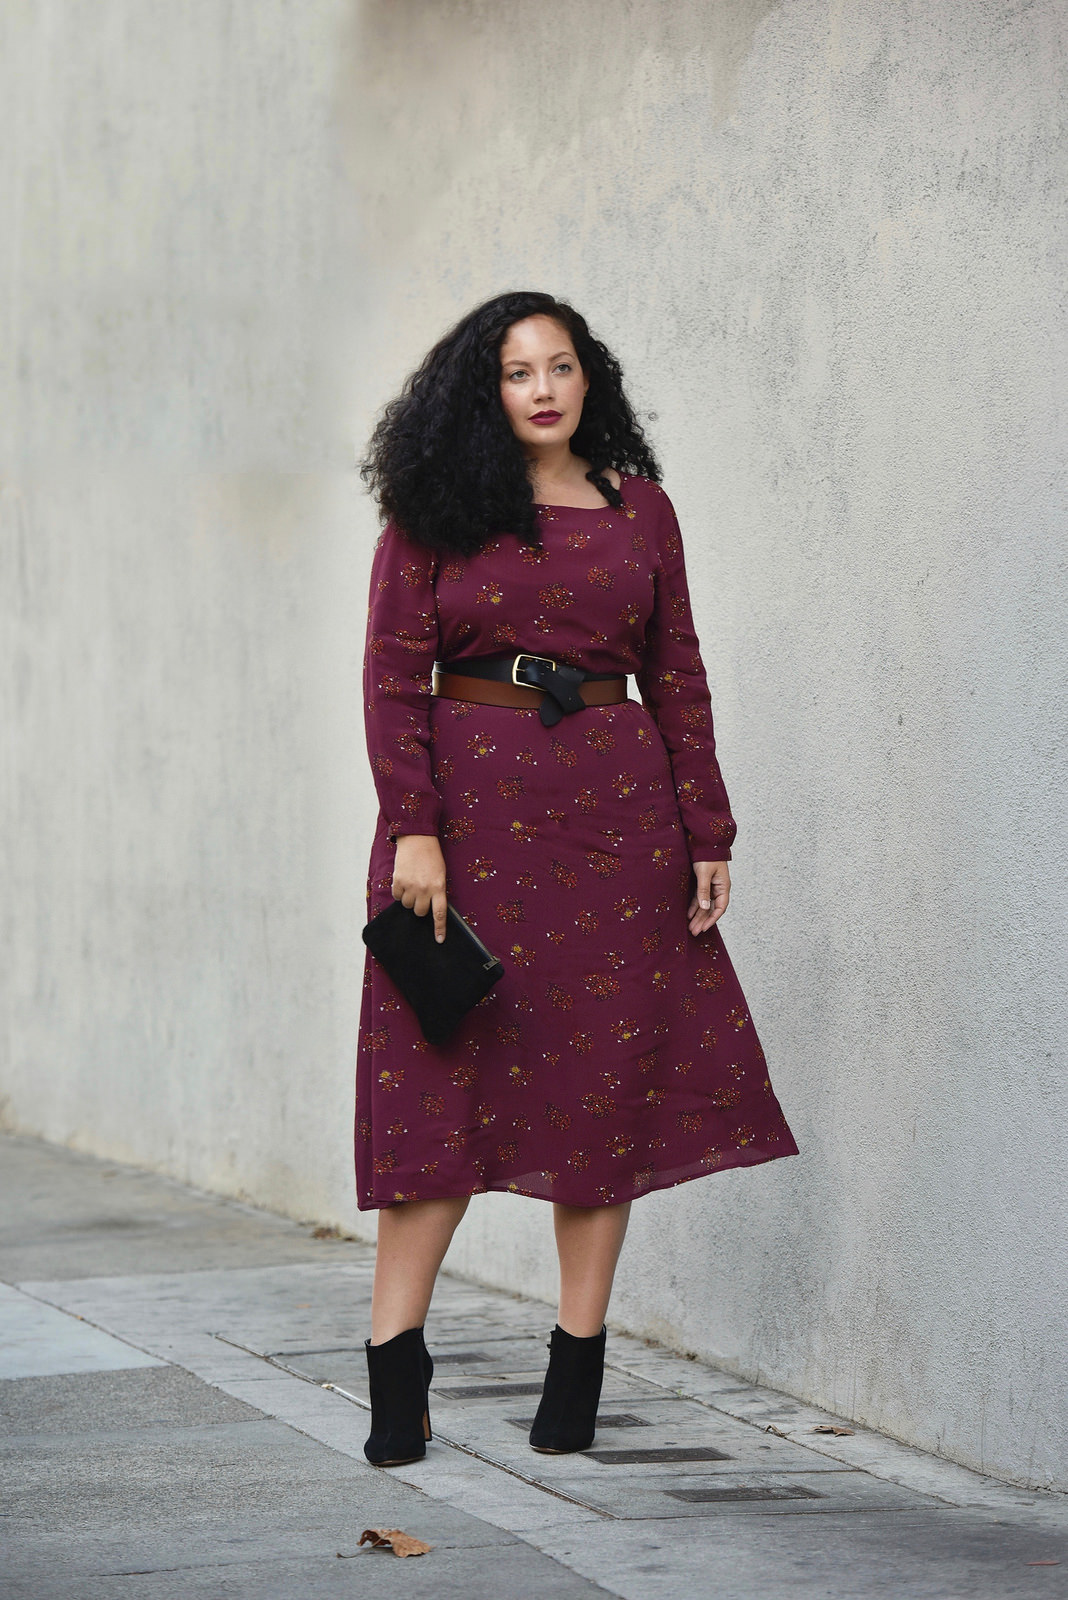 Belted Midi Dress by Girl With Curves